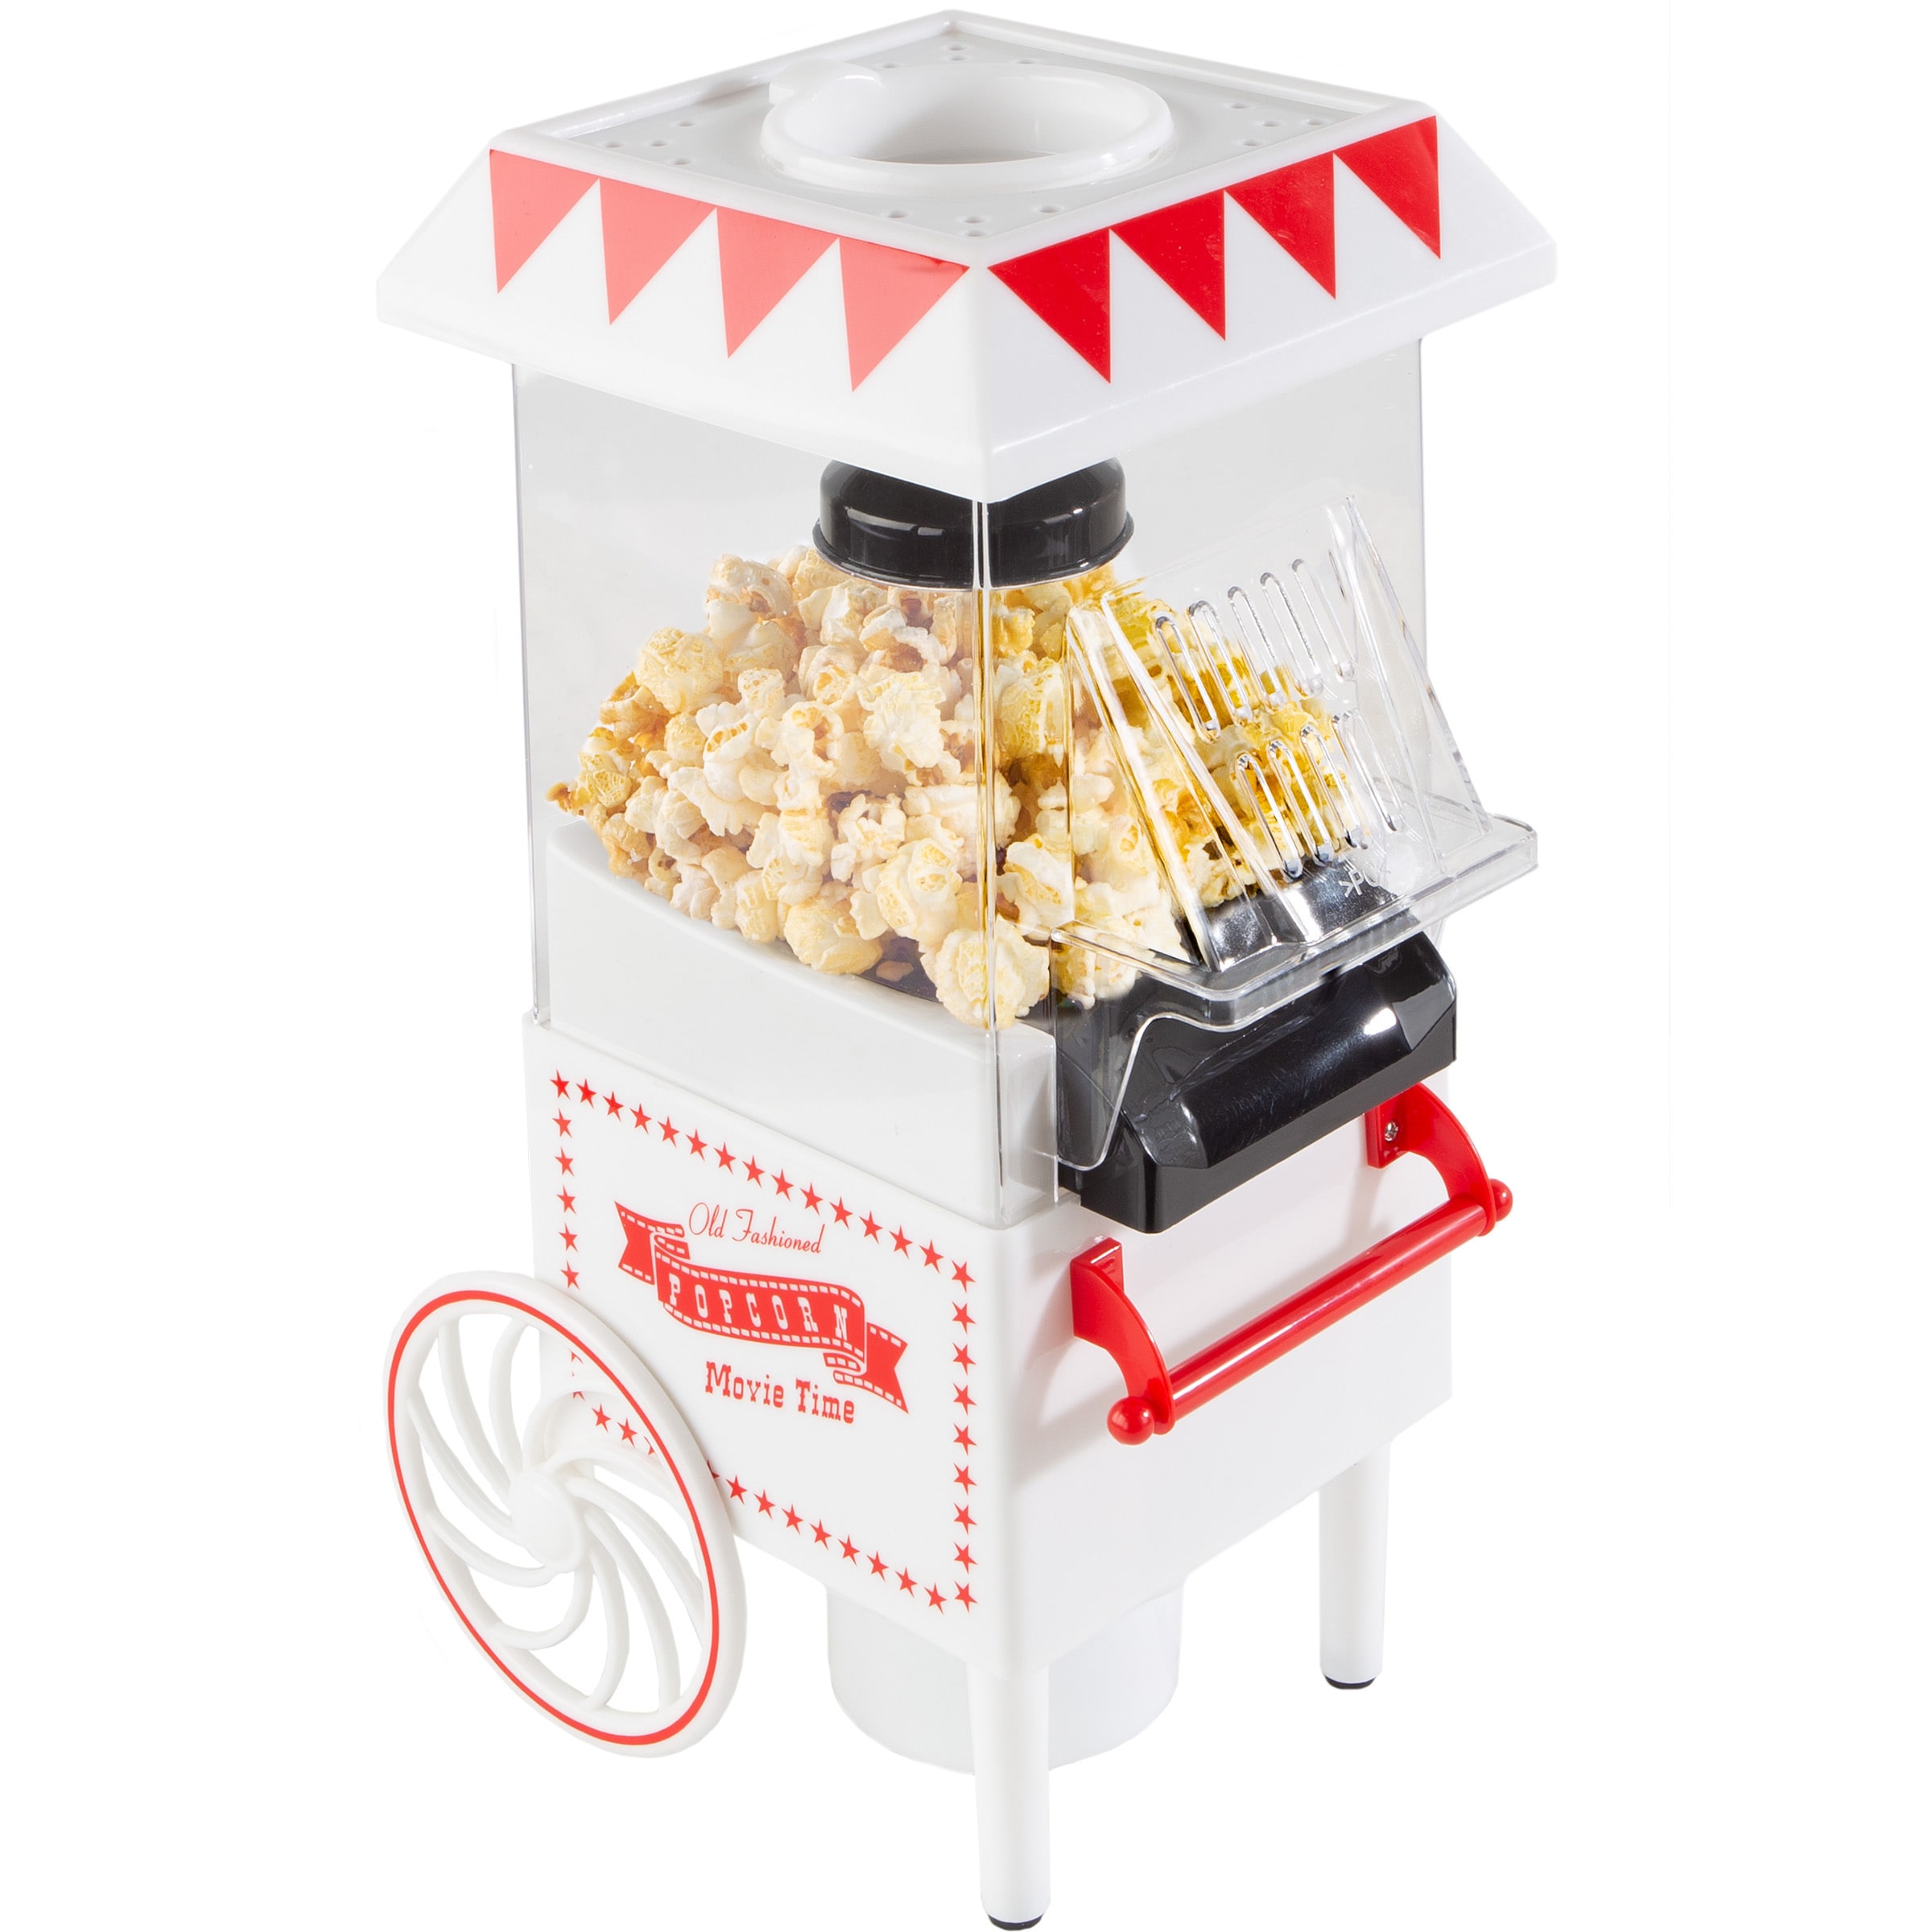 Hastings Home White Hot Air Popcorn Popper - Electric Popcorn